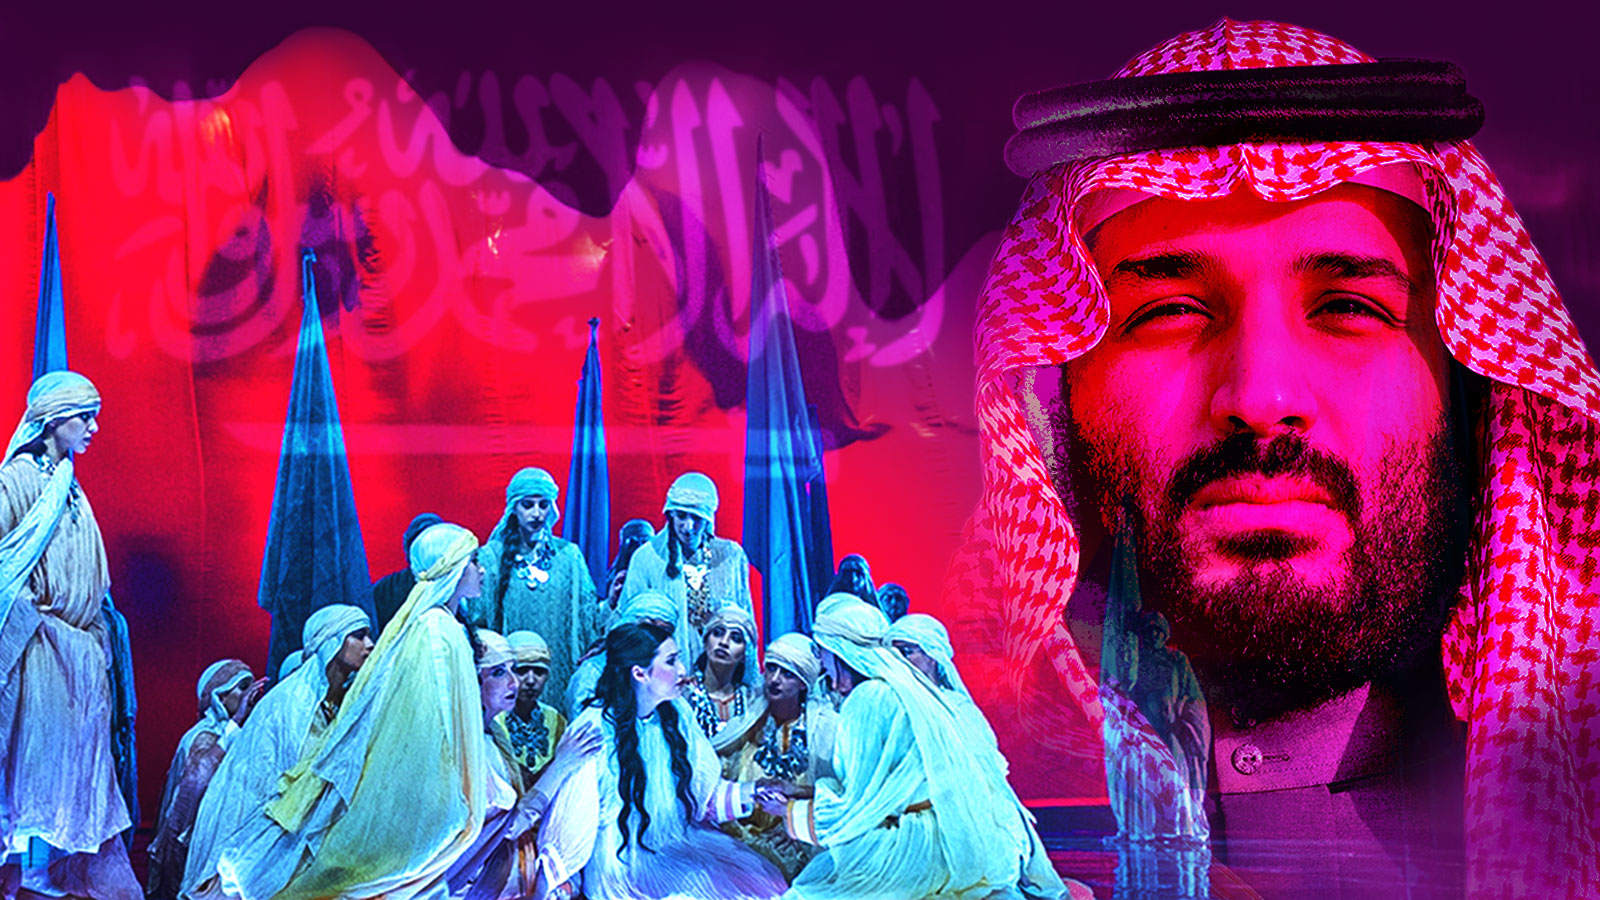 Crown Prince Mohammed bin Salman has invested in polishing up the country’s image